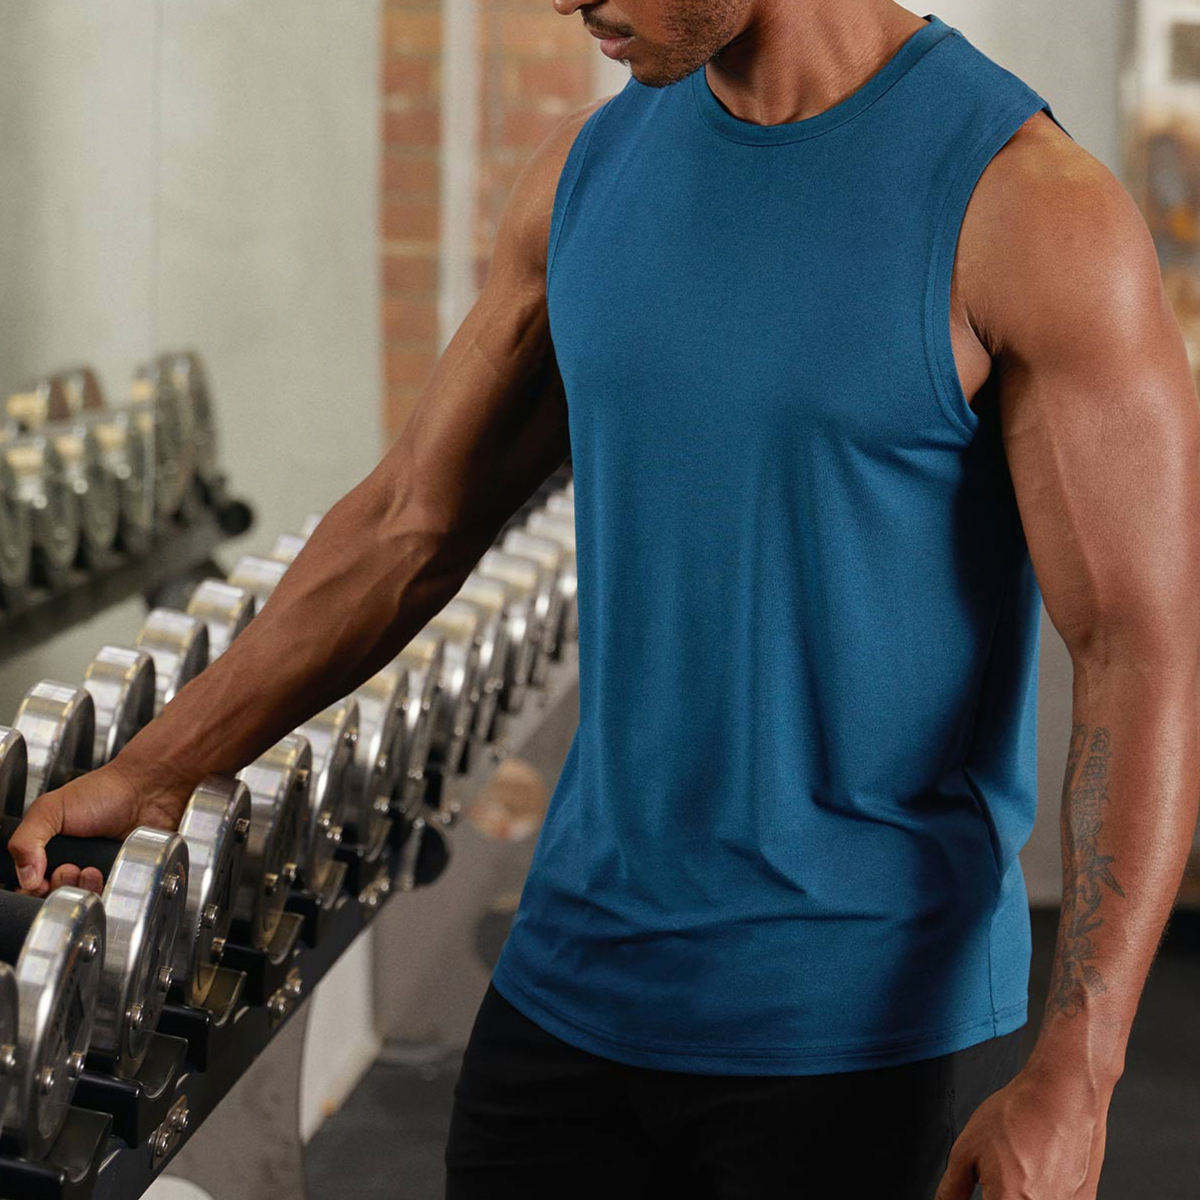 Workout Compression Tank Tops factory